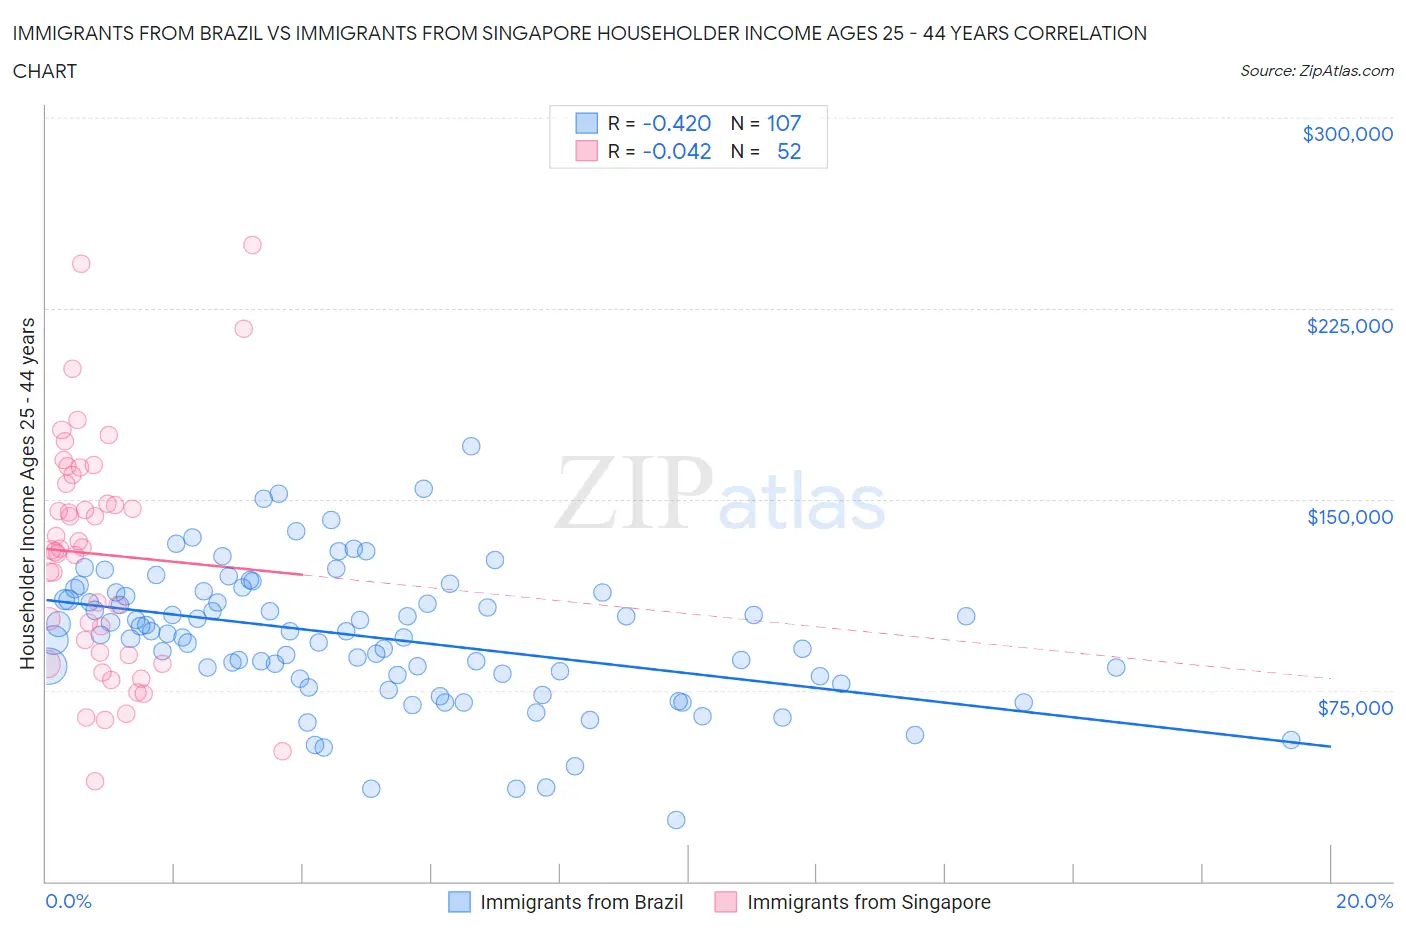 Immigrants from Brazil vs Immigrants from Singapore Householder Income Ages 25 - 44 years